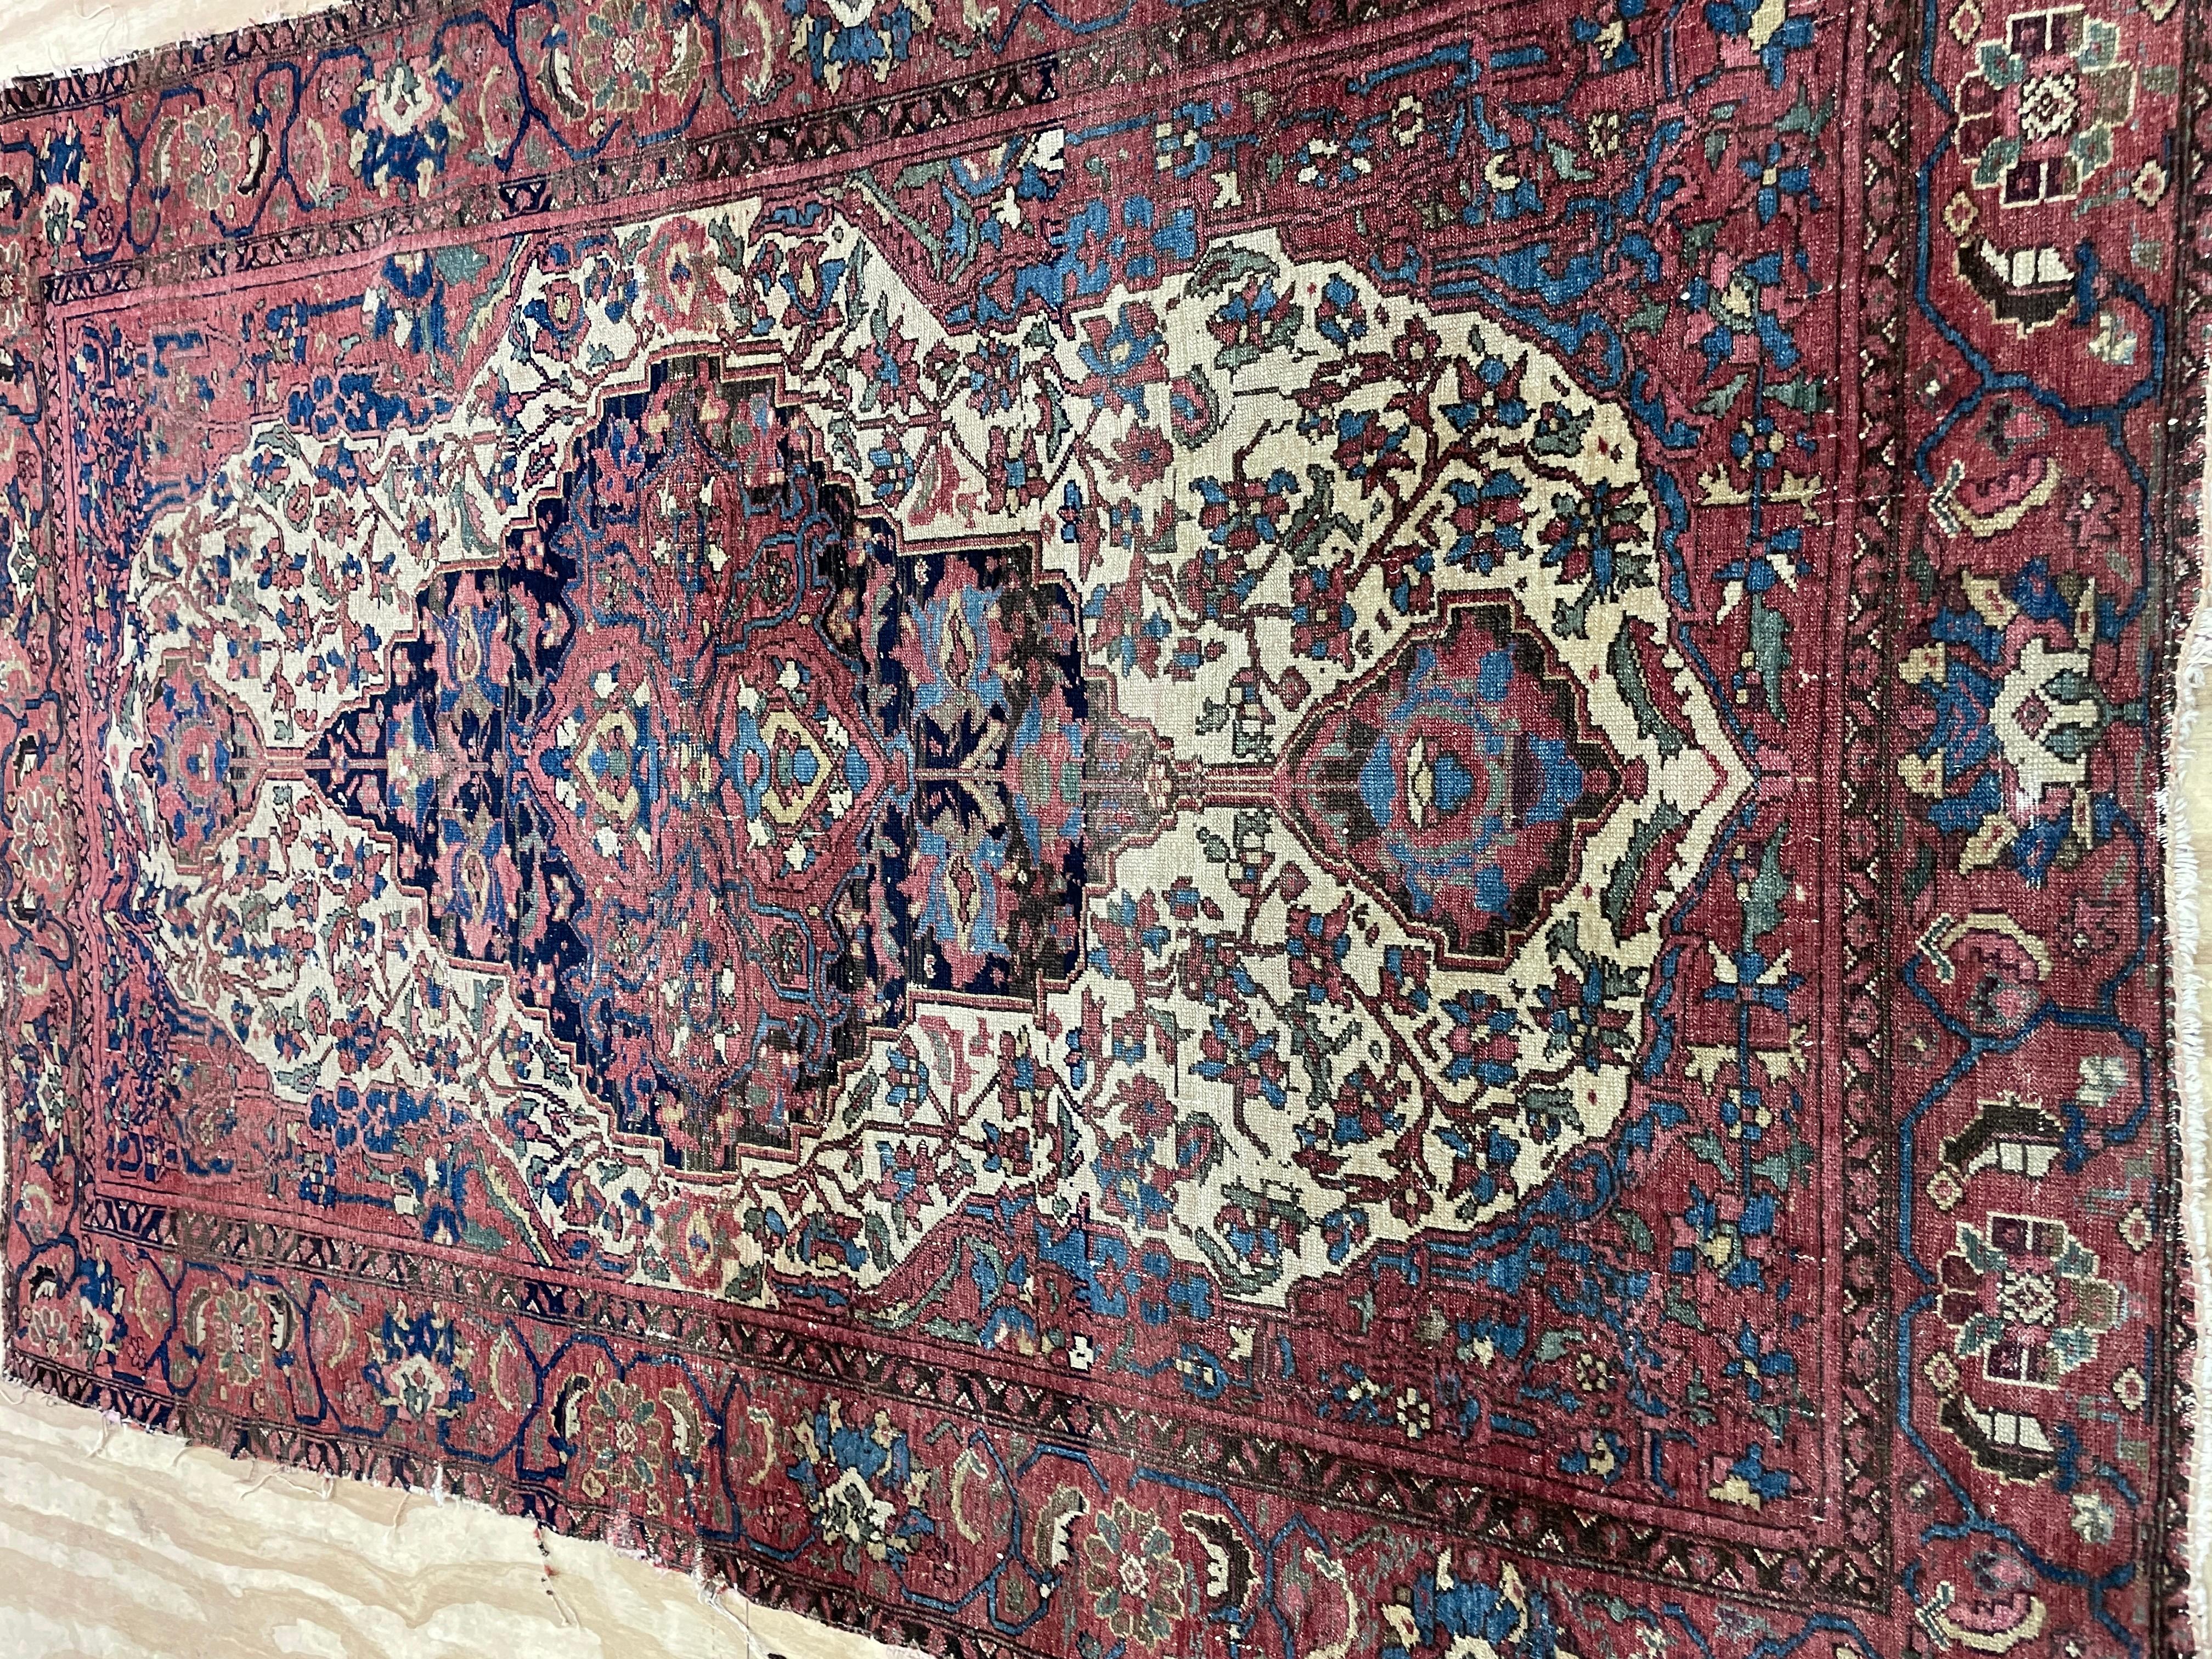 
Explore the Timeless Beauty of Antique Persian Malayer Rugs

Step into a world of elegance and history with this exquisite 4'2